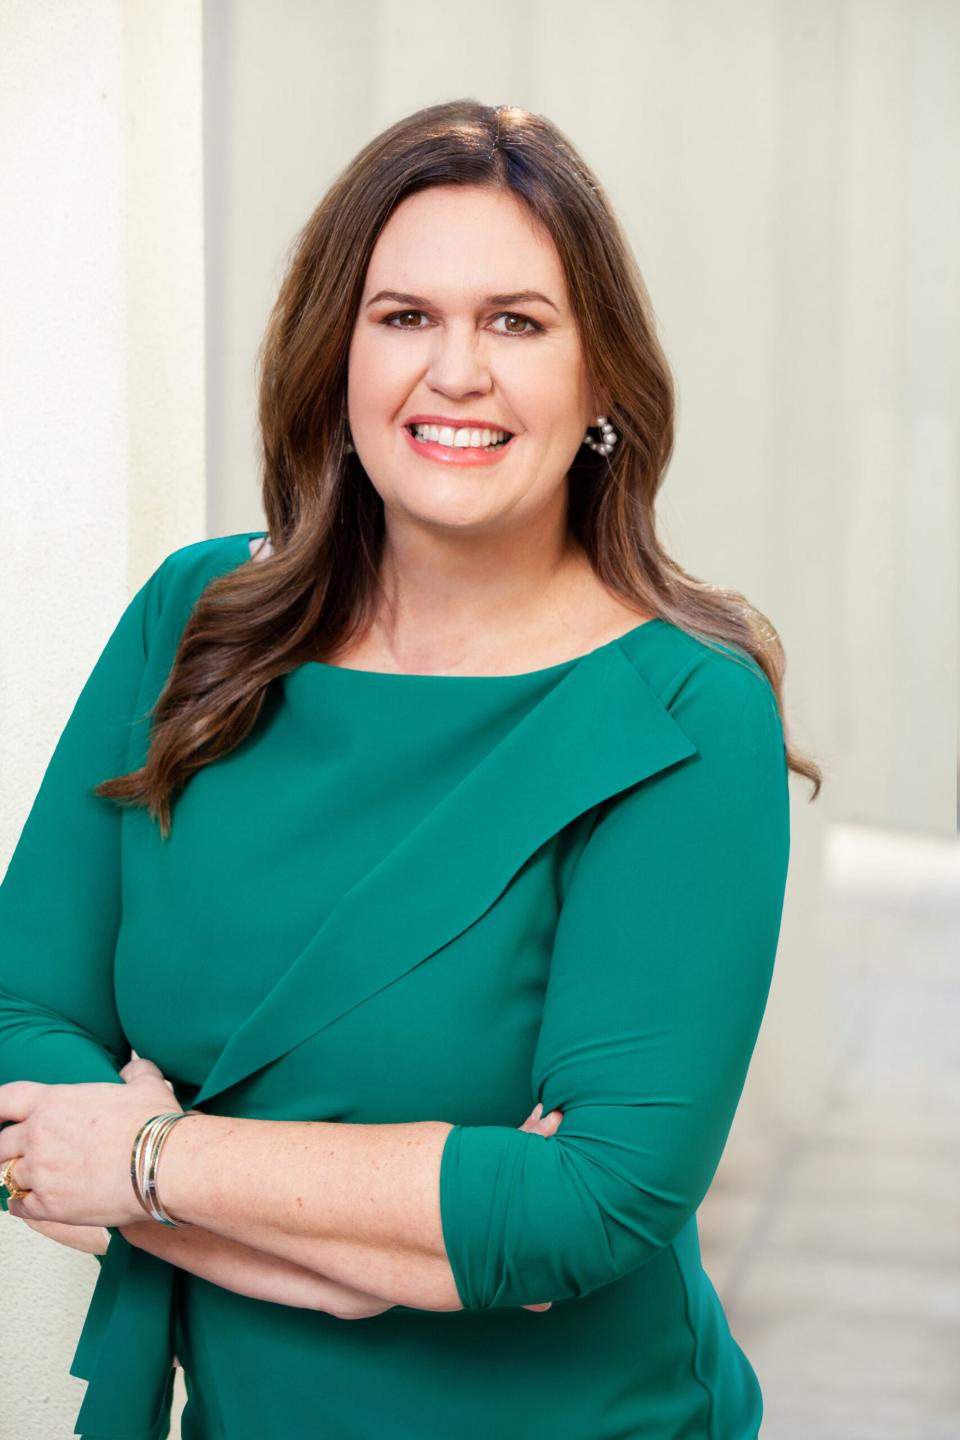 Arkansas Gov. Sarah Huckabee Sanders recently announced she was forcing a subsidiary of Syngenta Seeds, LLC, which is Chinese-owned, to sell 160 acres of land it owns in the northeast part of the state.